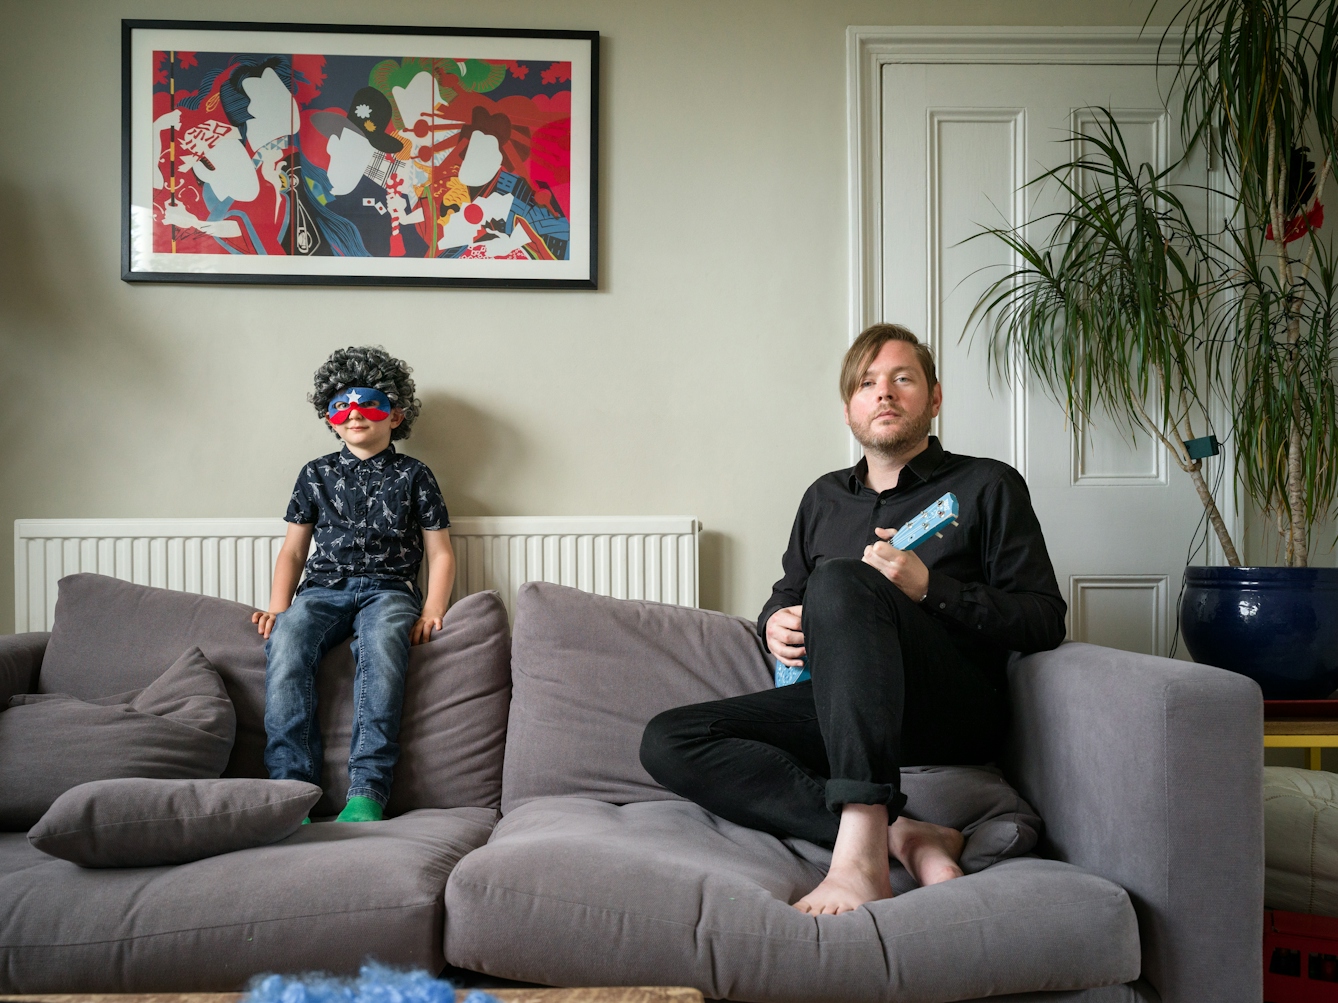 Photograph of a man and his son siting on a sofa in a living room. The son is wearing a grey curly wig and an eye mask made of a red and blue stripe and a single white star. The father is holding a small blue guitar. Behind them on the wall is a colourful poster.